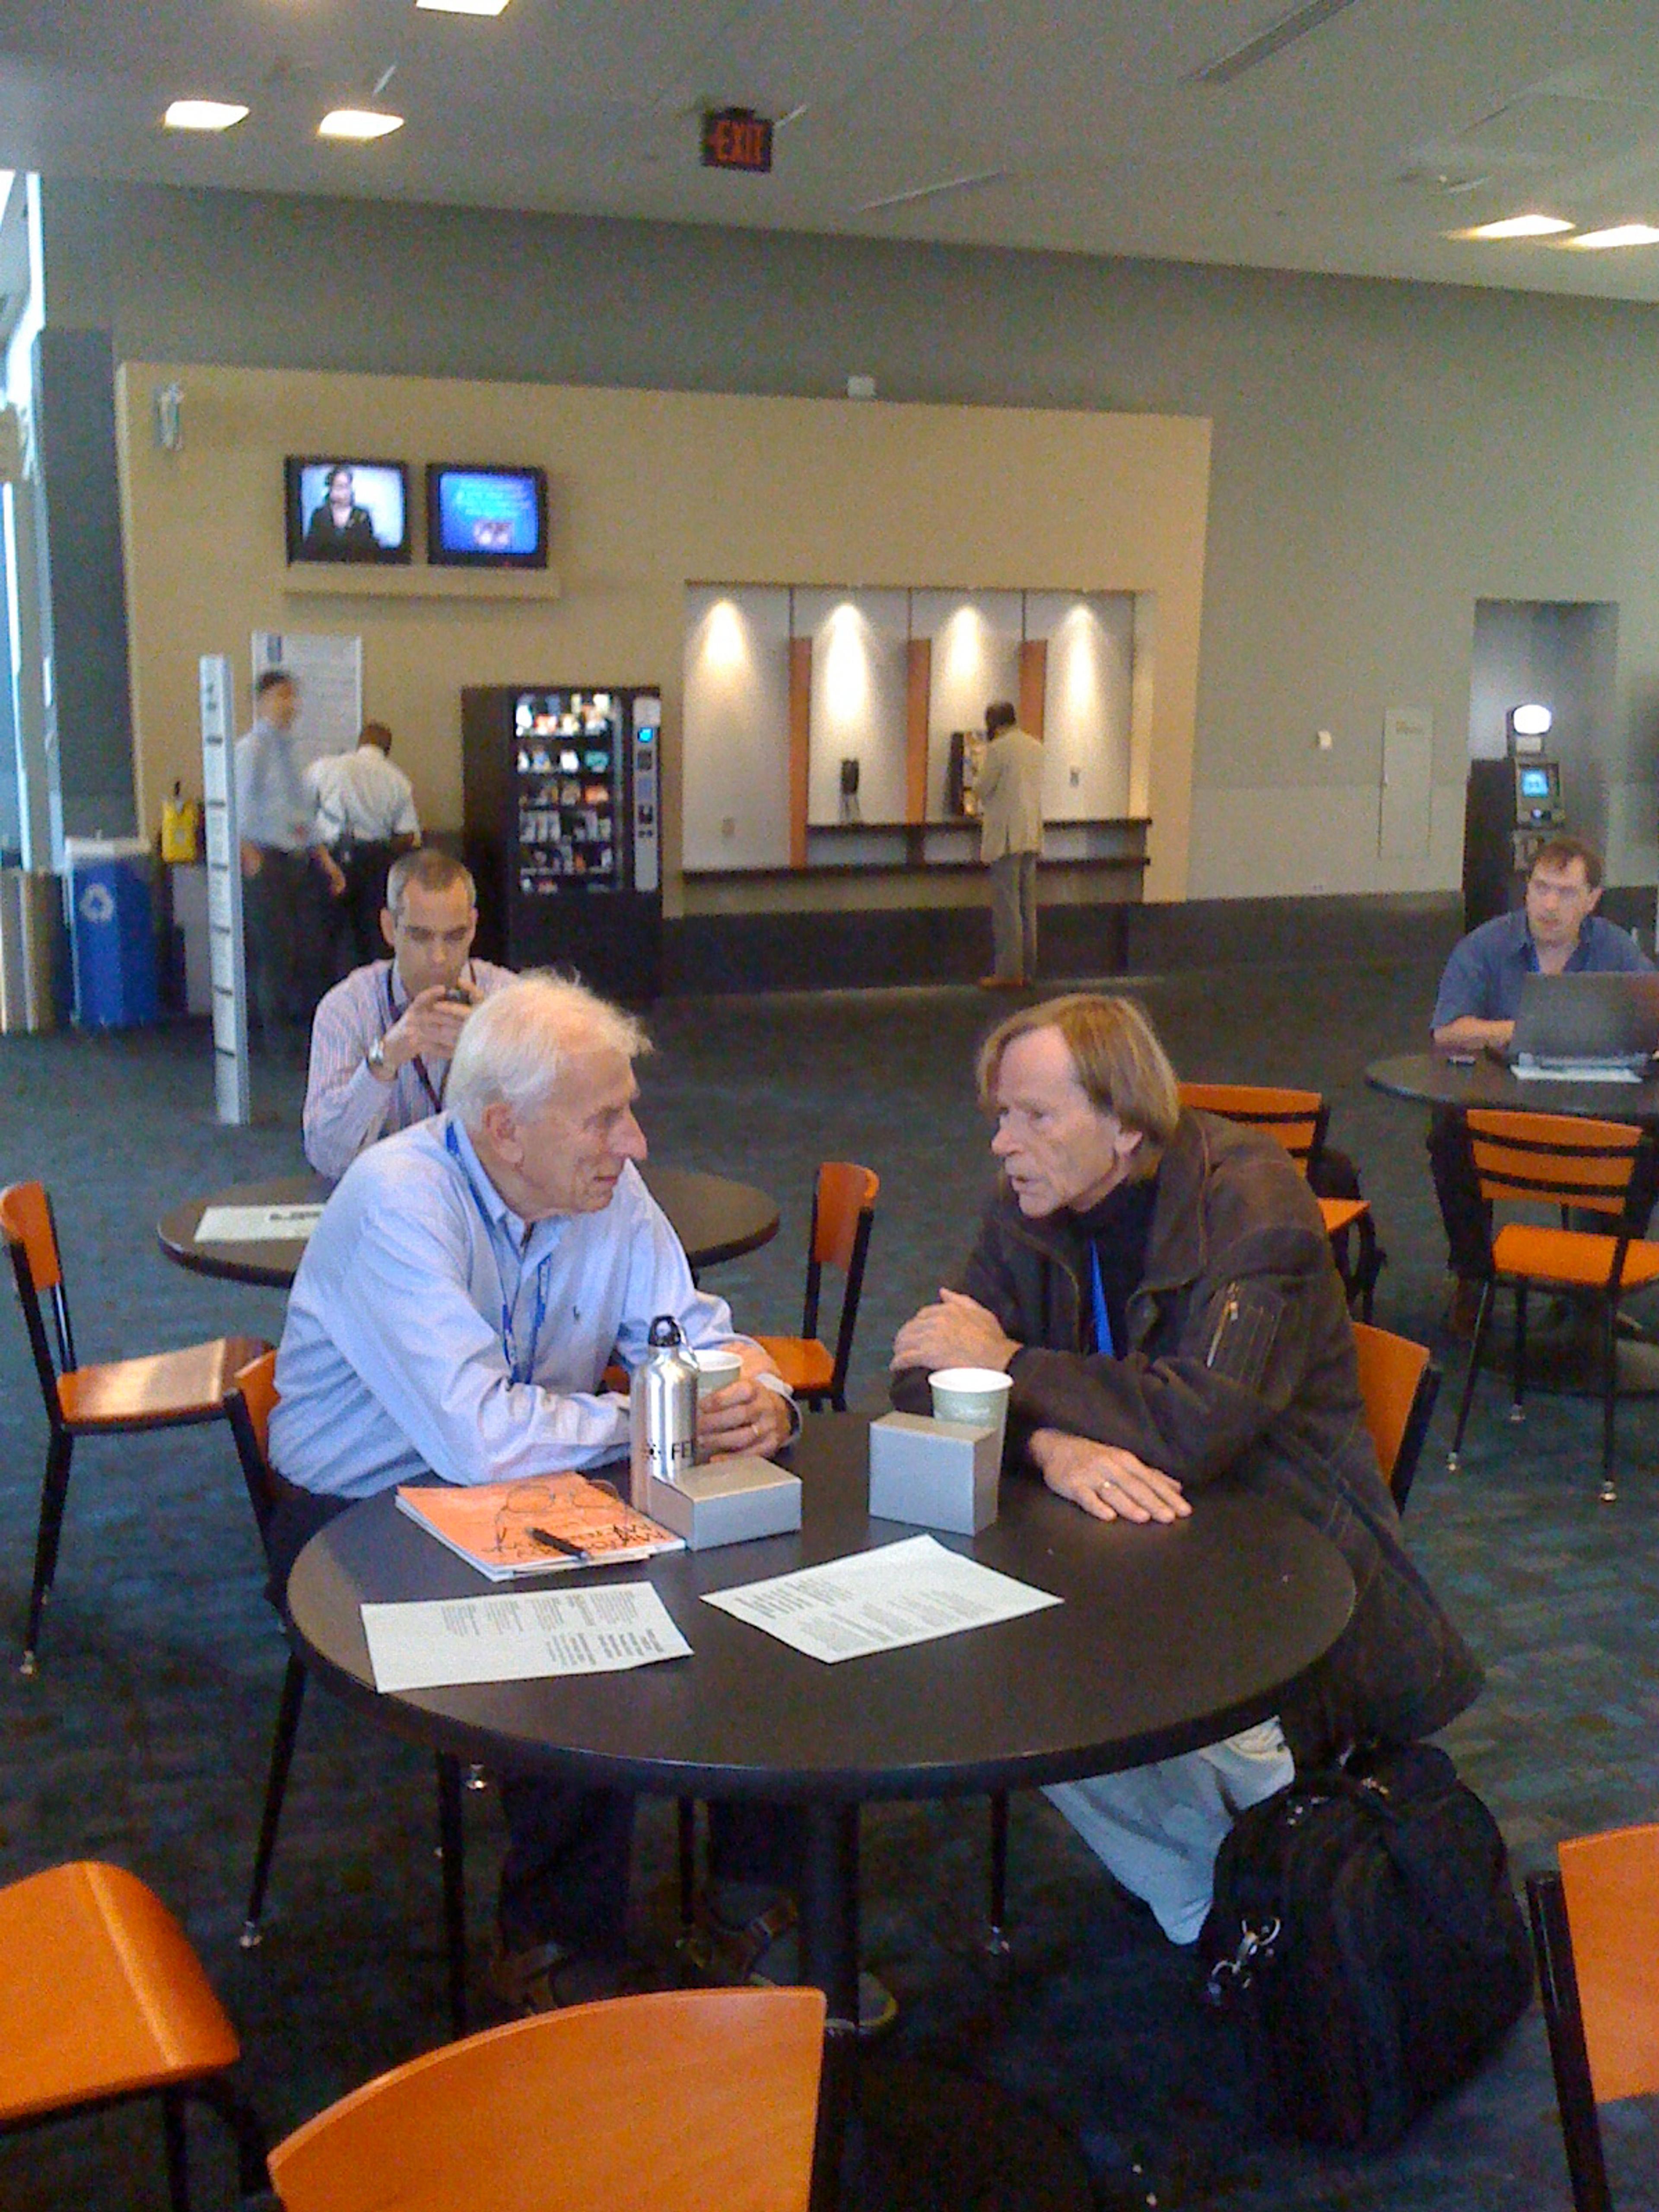 Harald Rose in discussion with professor Hannes Lichte at the M&M Conference in 2009